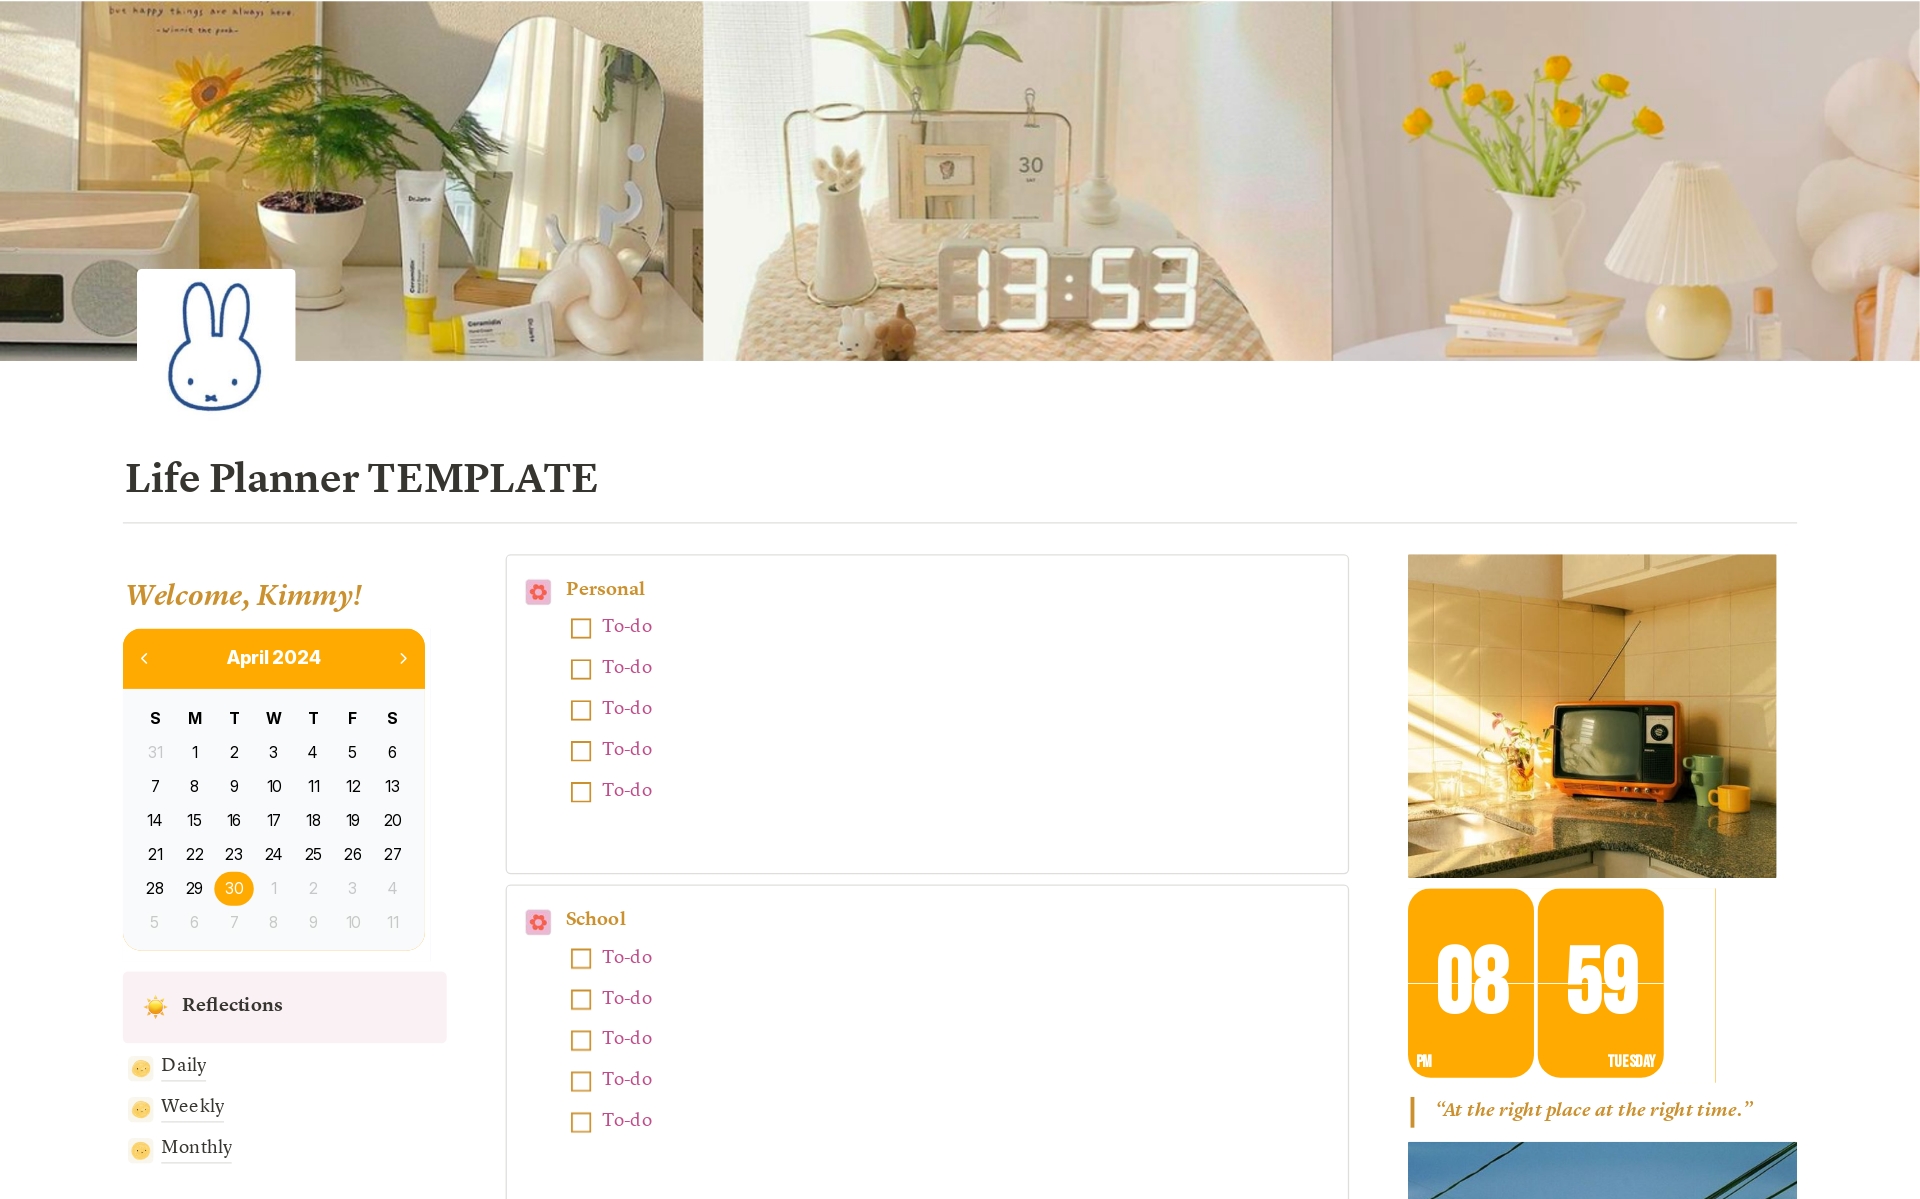 This template is meant to help you plan and organize all the work you need to accomplish. Visualize your most important to-do's with an agenda that helps you prioritize.
